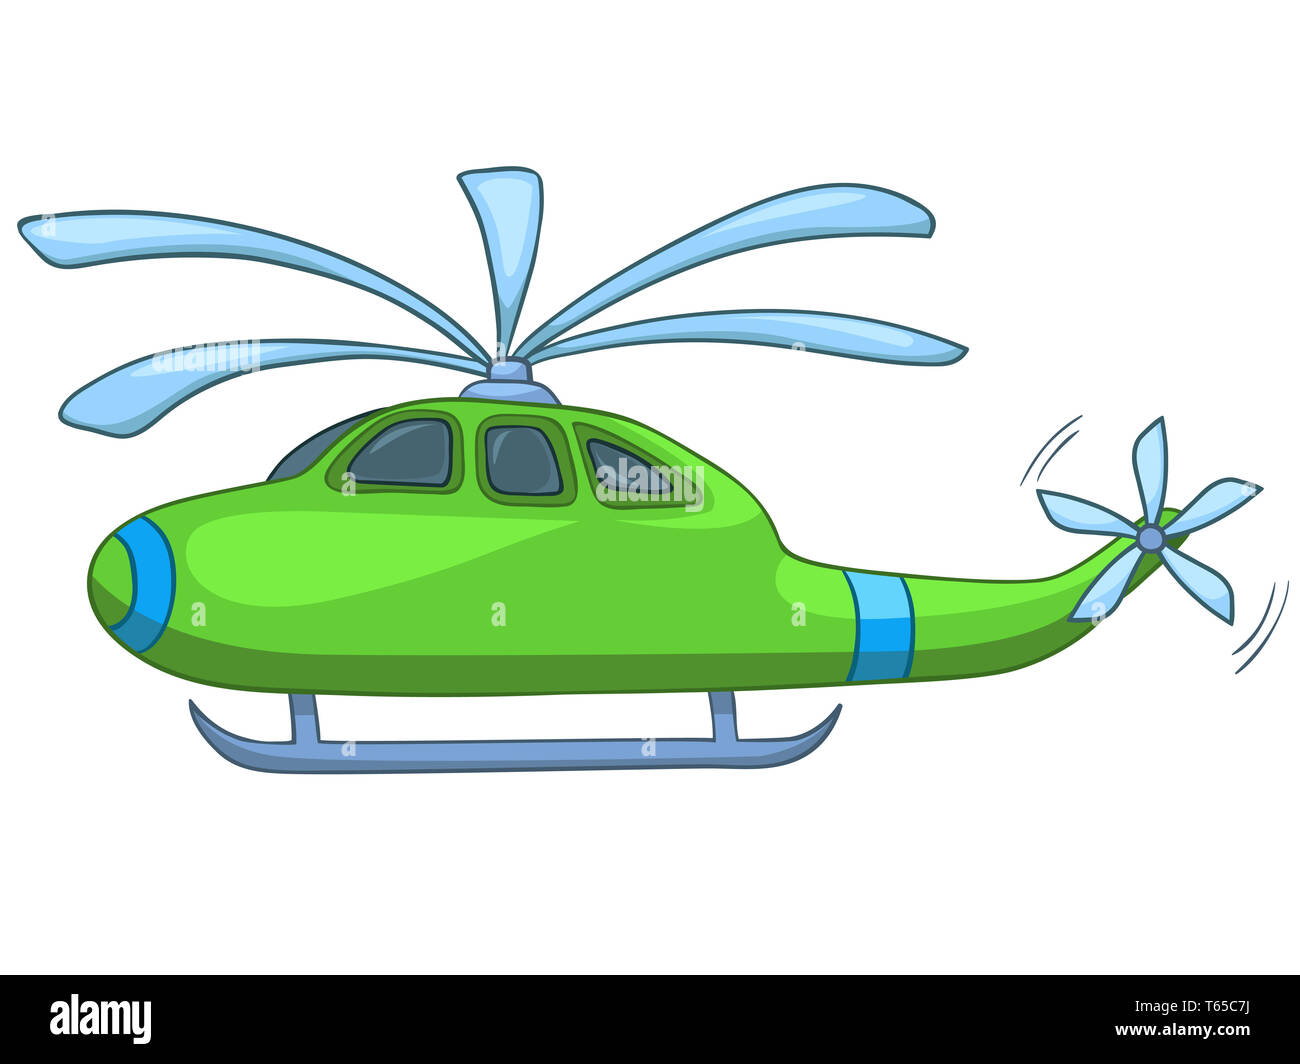 Helicopter cartoon Cut Out Stock Images & Pictures - Alamy